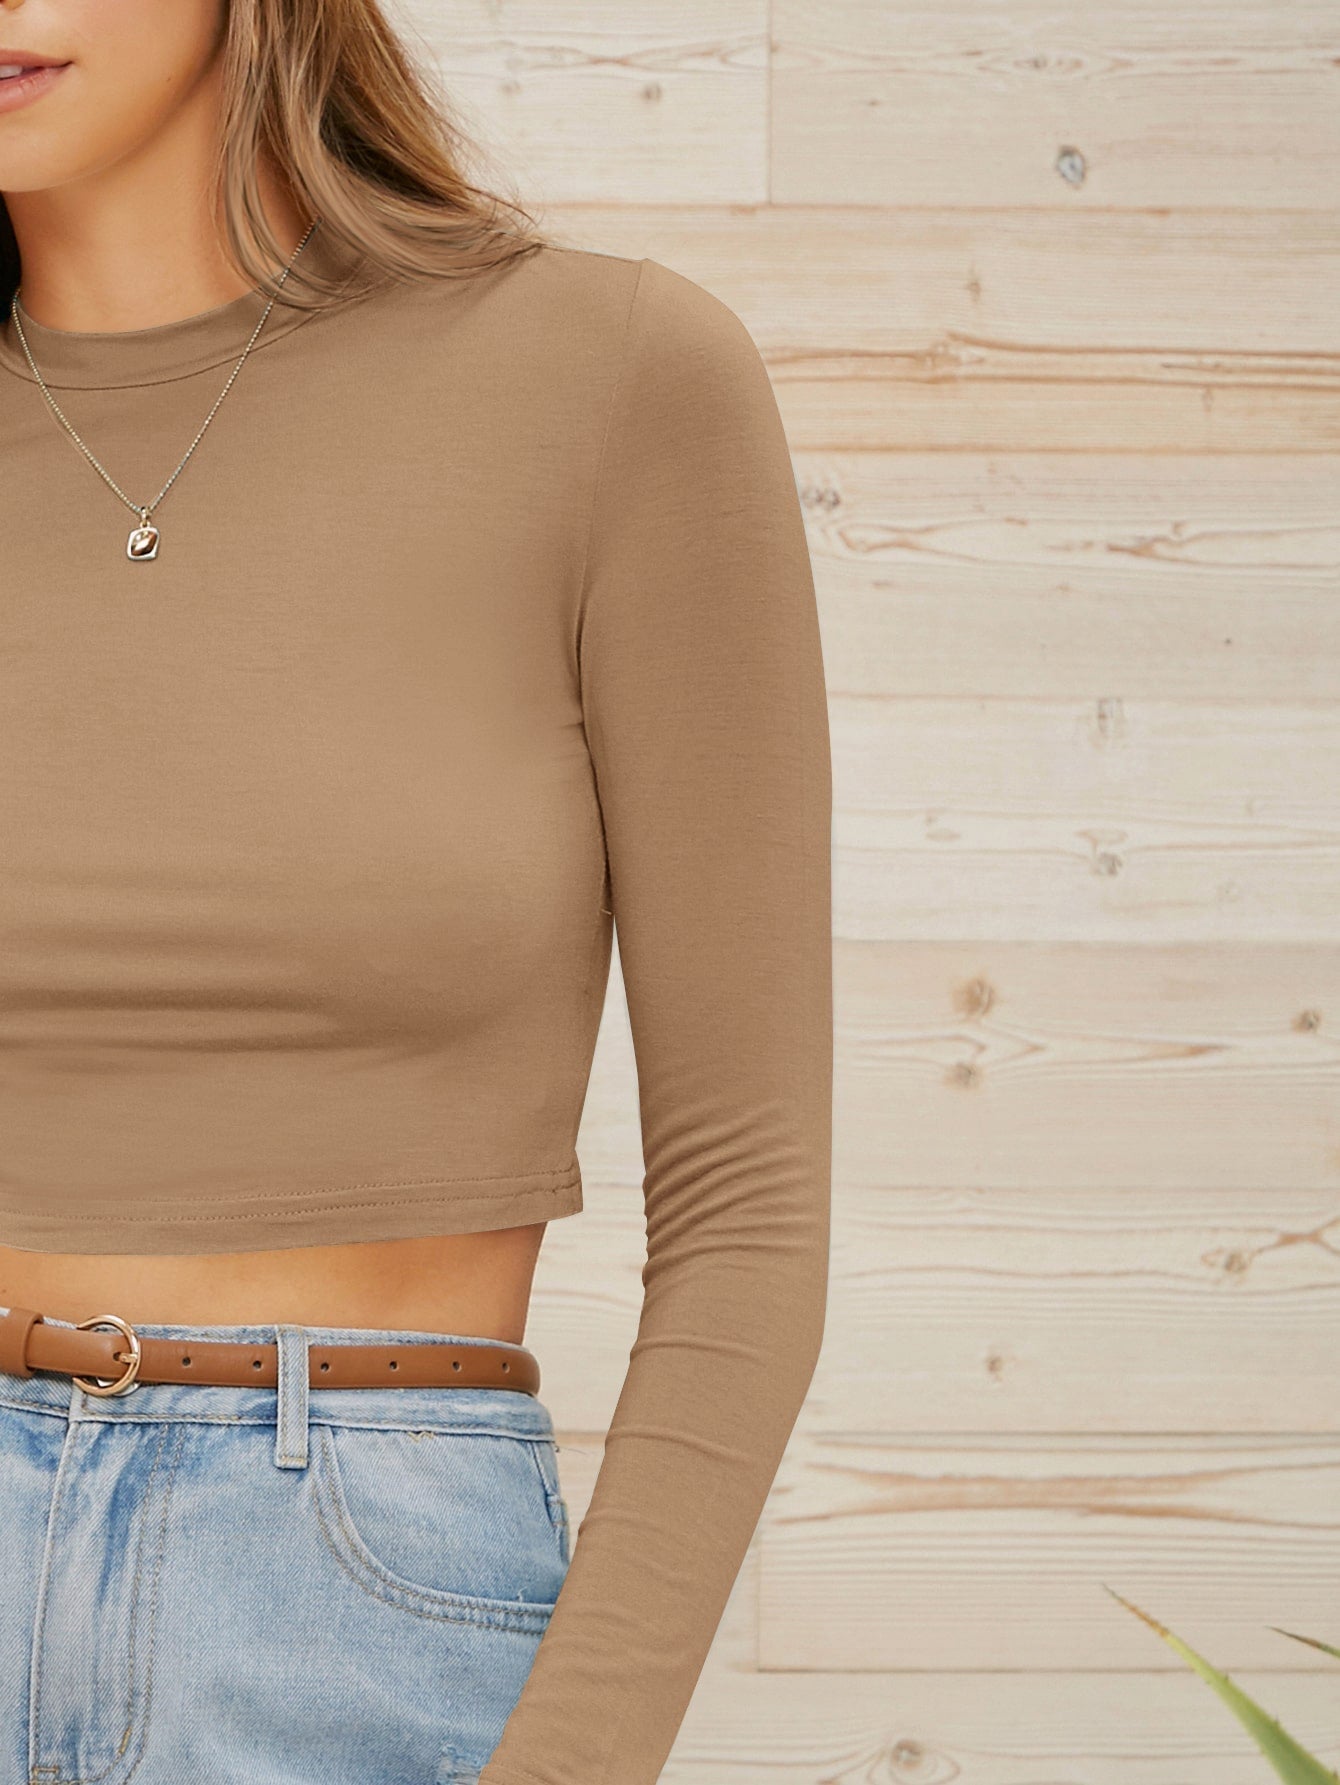 Form-Fitting Long Sleeve Crop Top - Negative Apparel